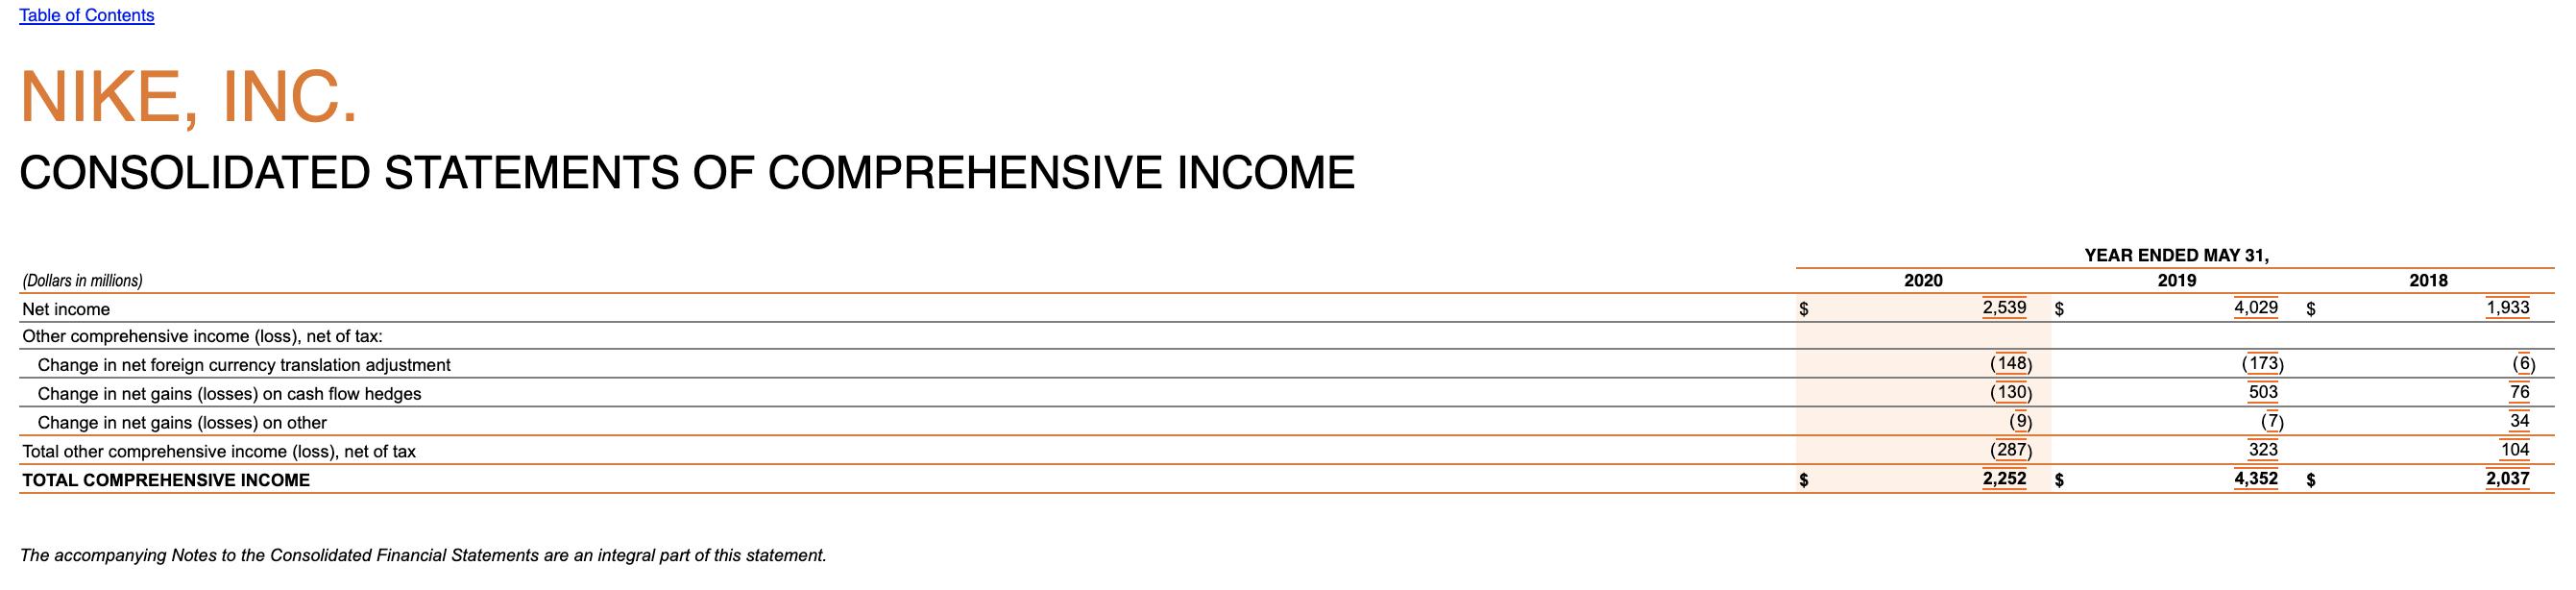 Table of Contents NIKE, INC. CONSOLIDATED STATEMENTS OF COMPREHENSIVE INCOME YEAR ENDED MAY 31, 2019 2020 2018 $2,539 $4,02